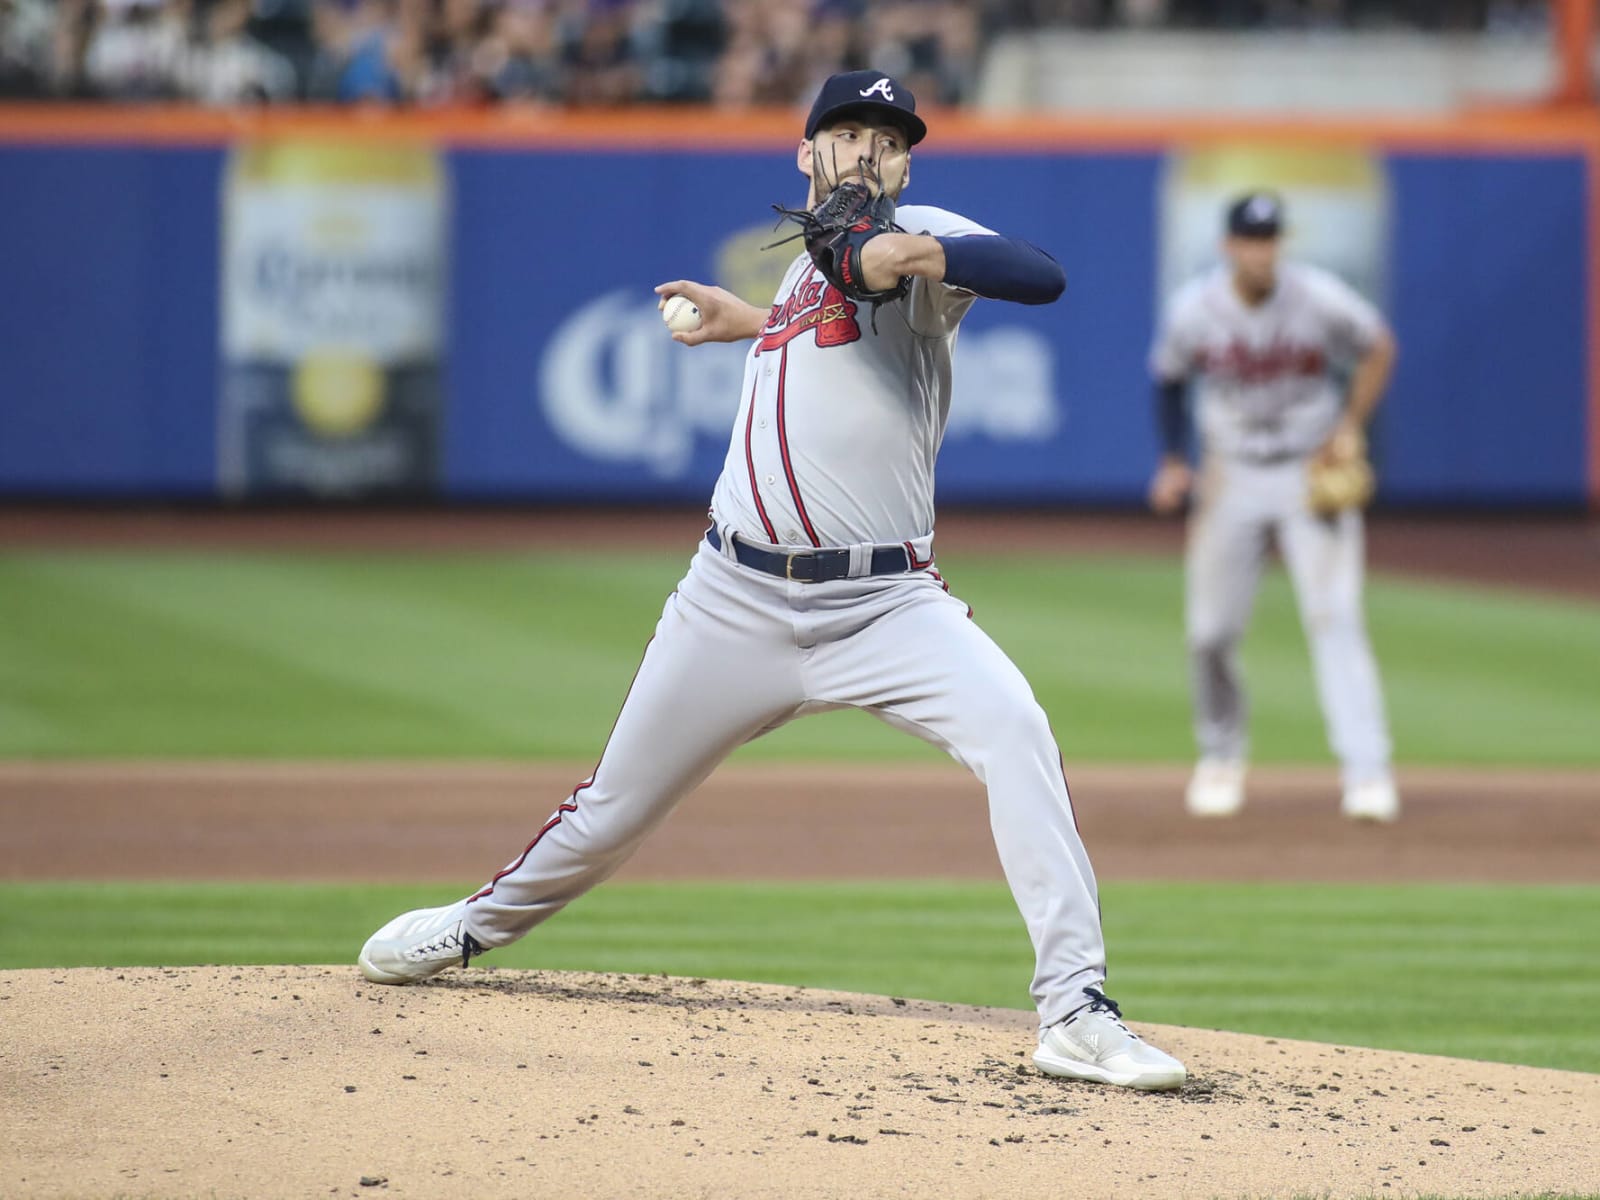 Atlanta Braves: Ian Anderson voted as biggest disappointment of 2022